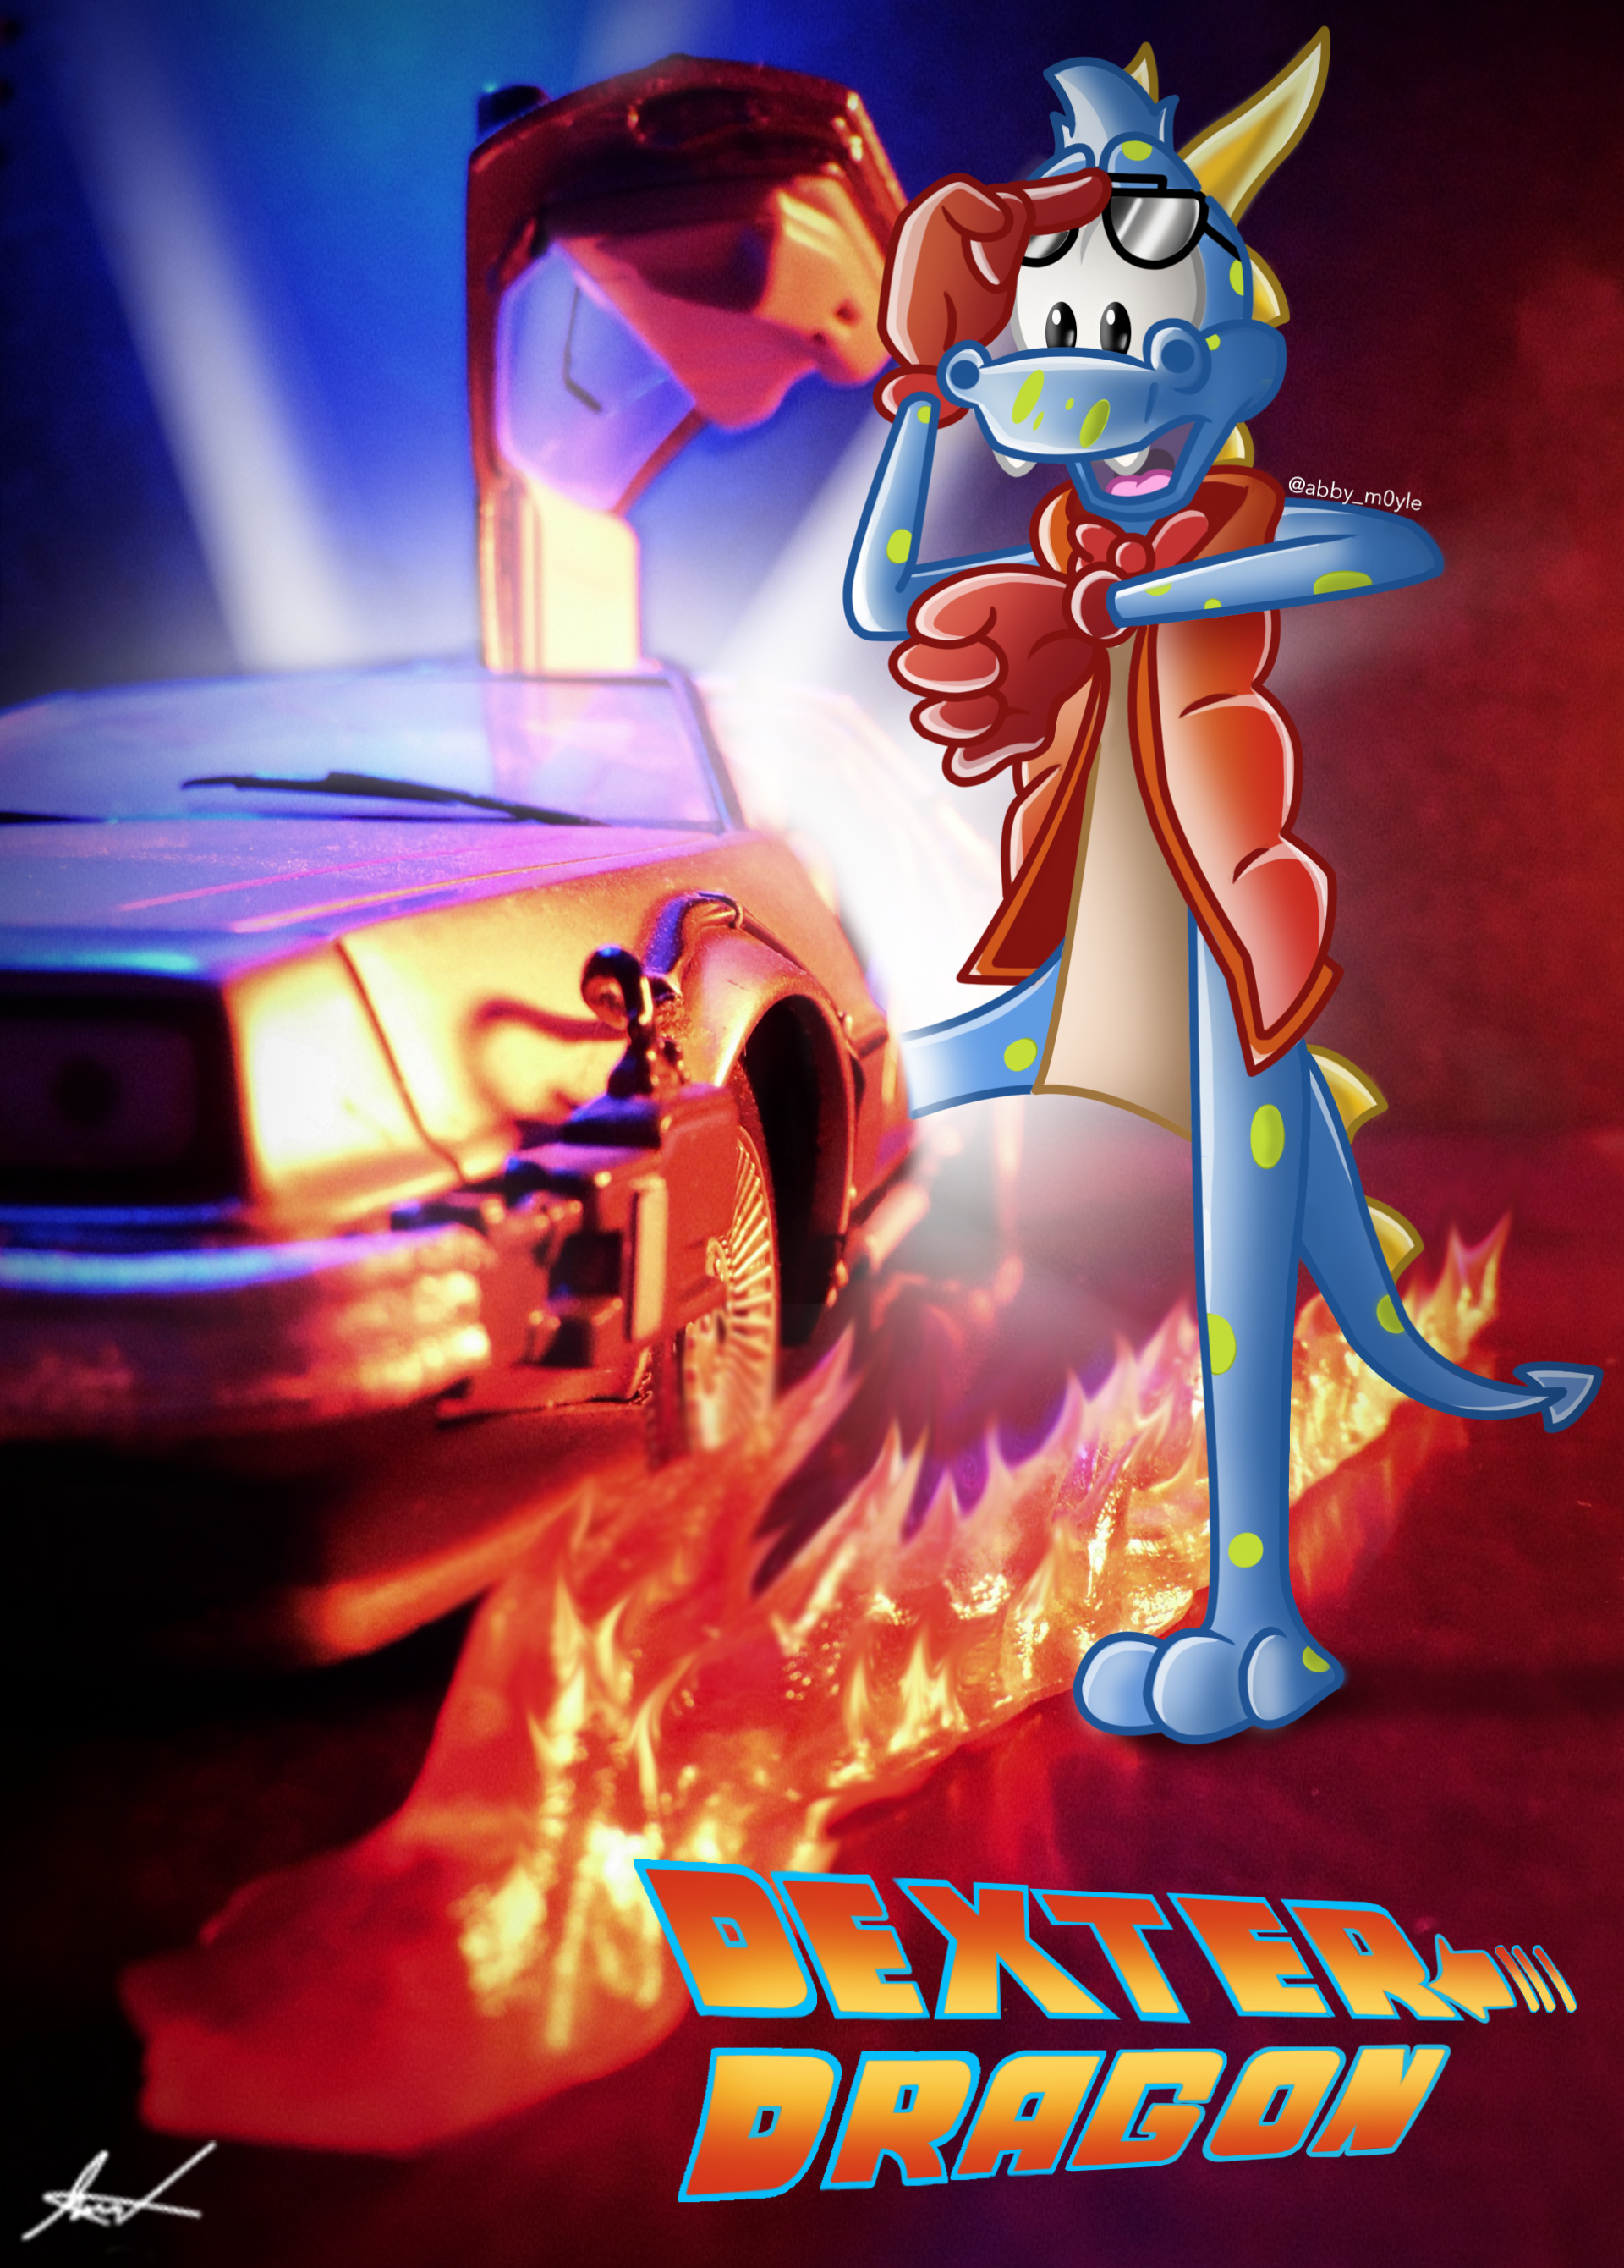 Back To The Future / Dexter Dragon